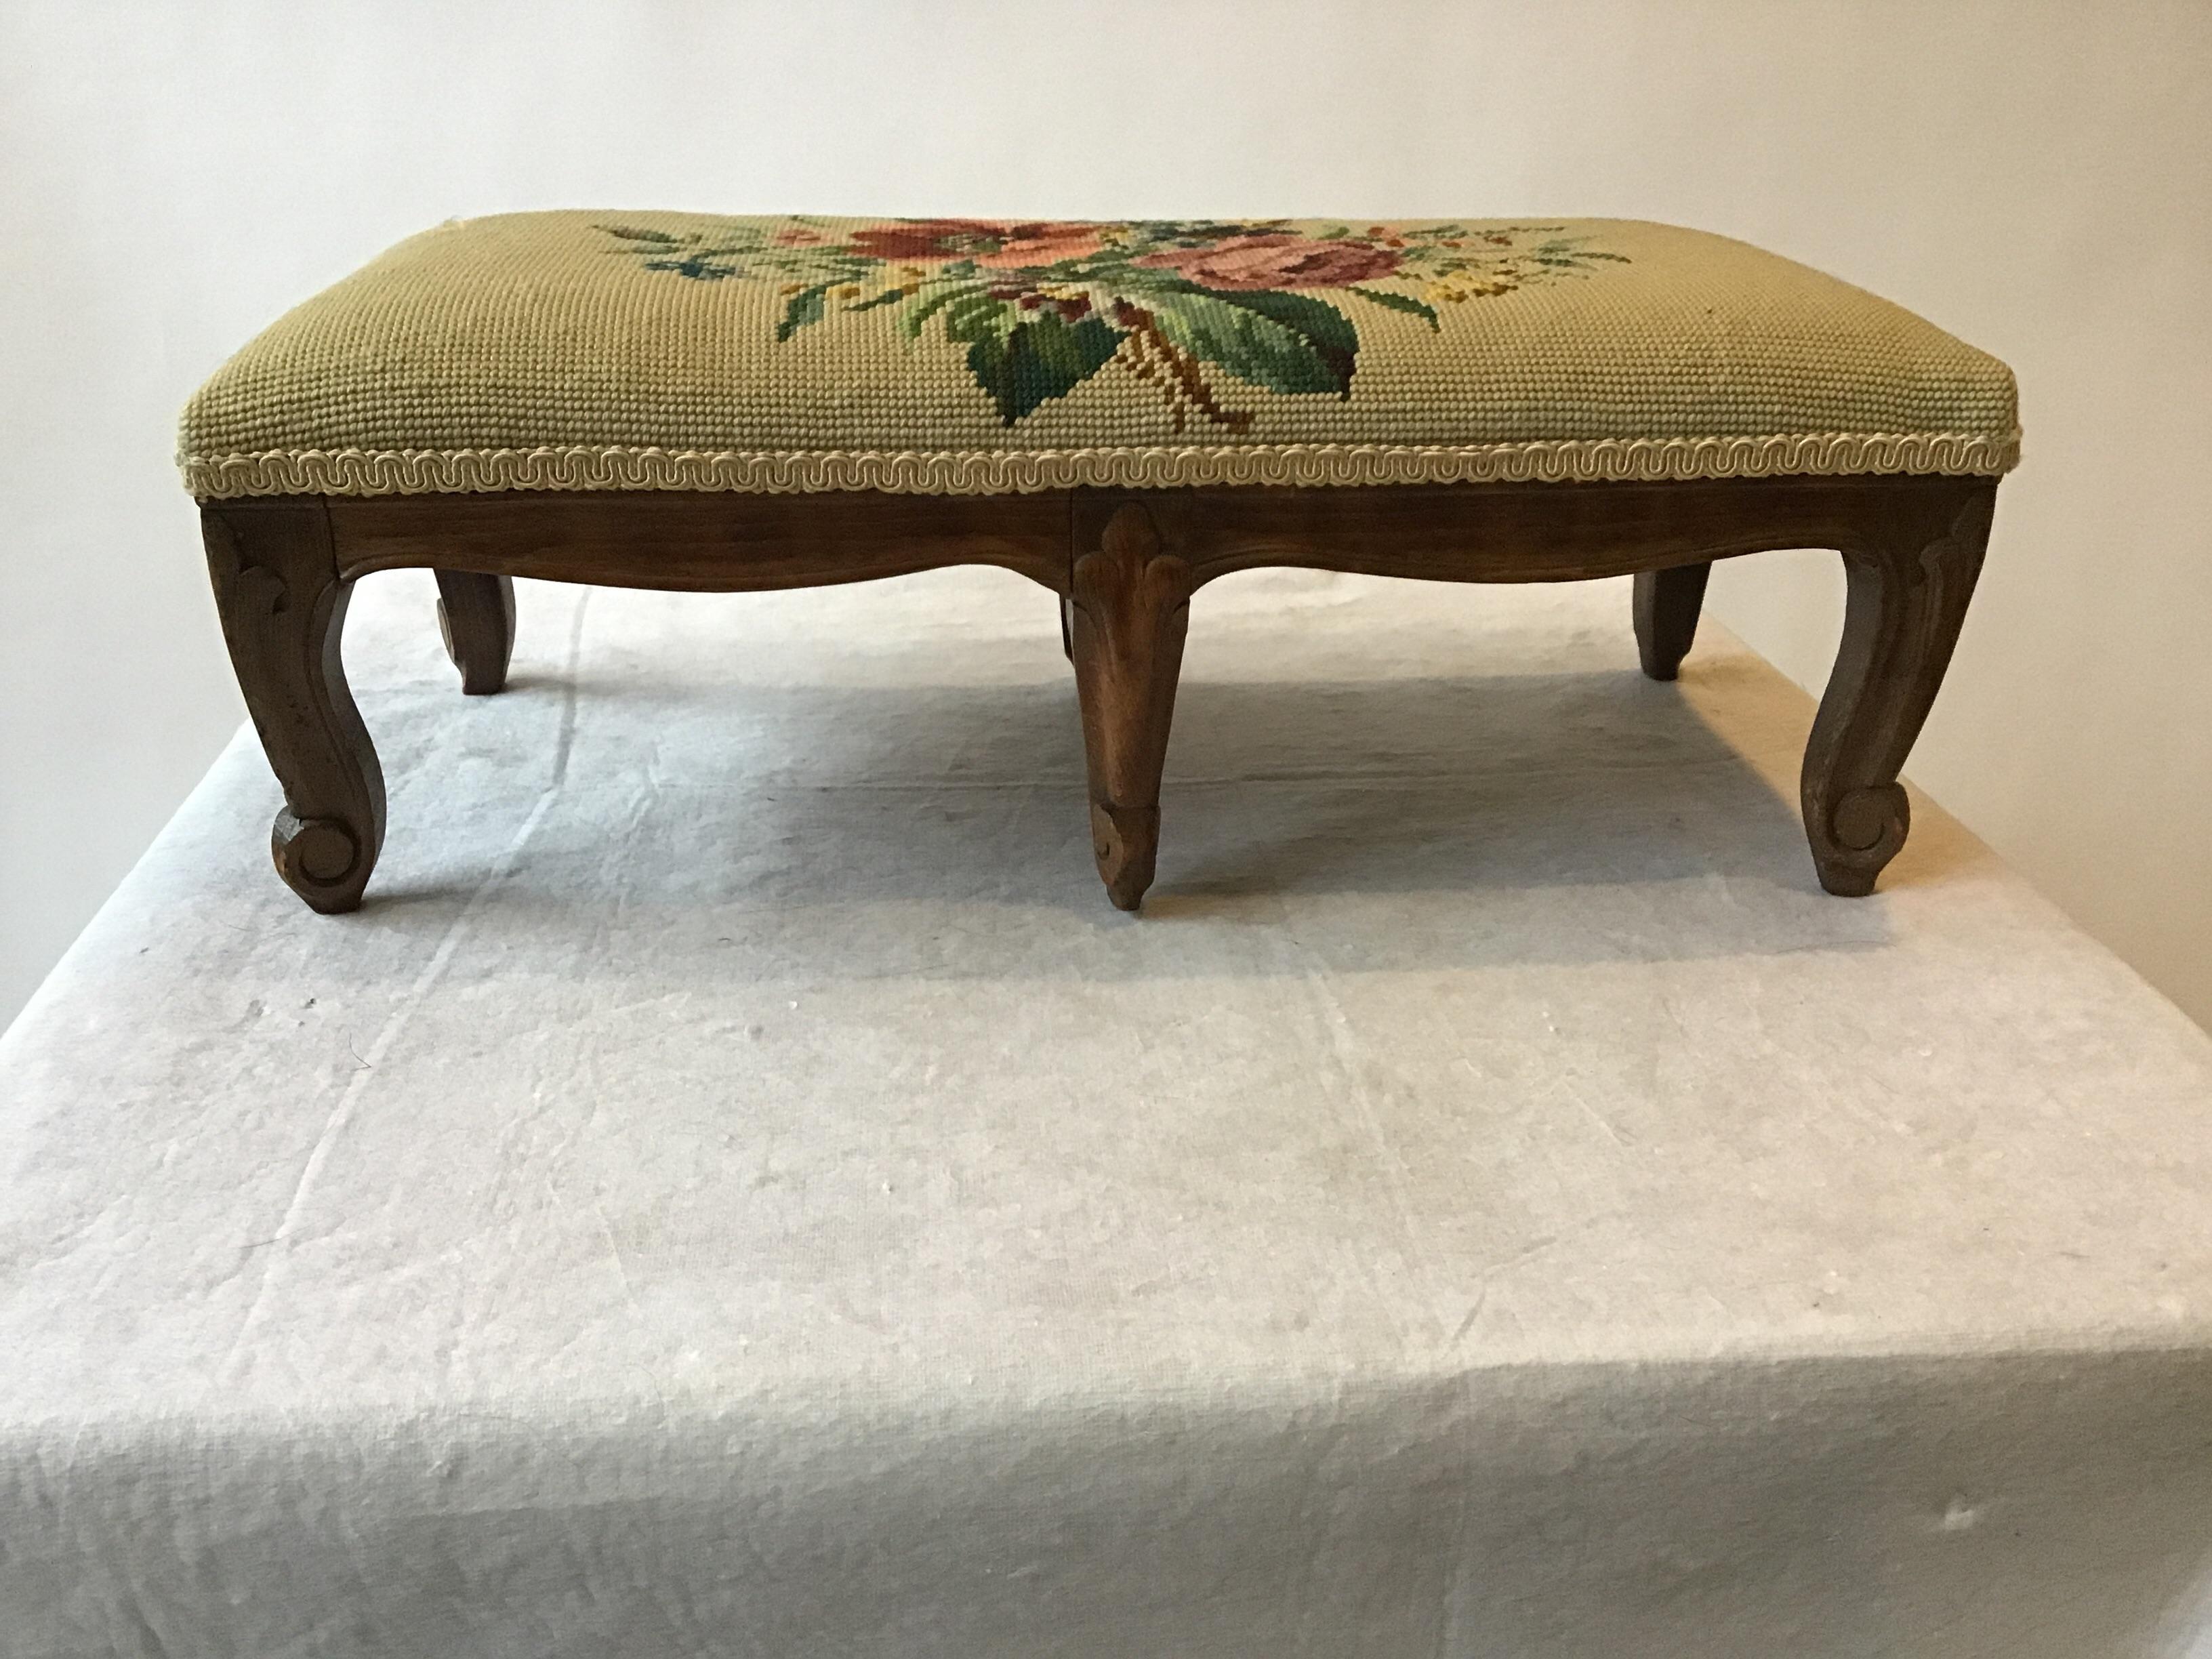 1940s 6 leg footstool. Needlepoint top. Marked made in Belgium.